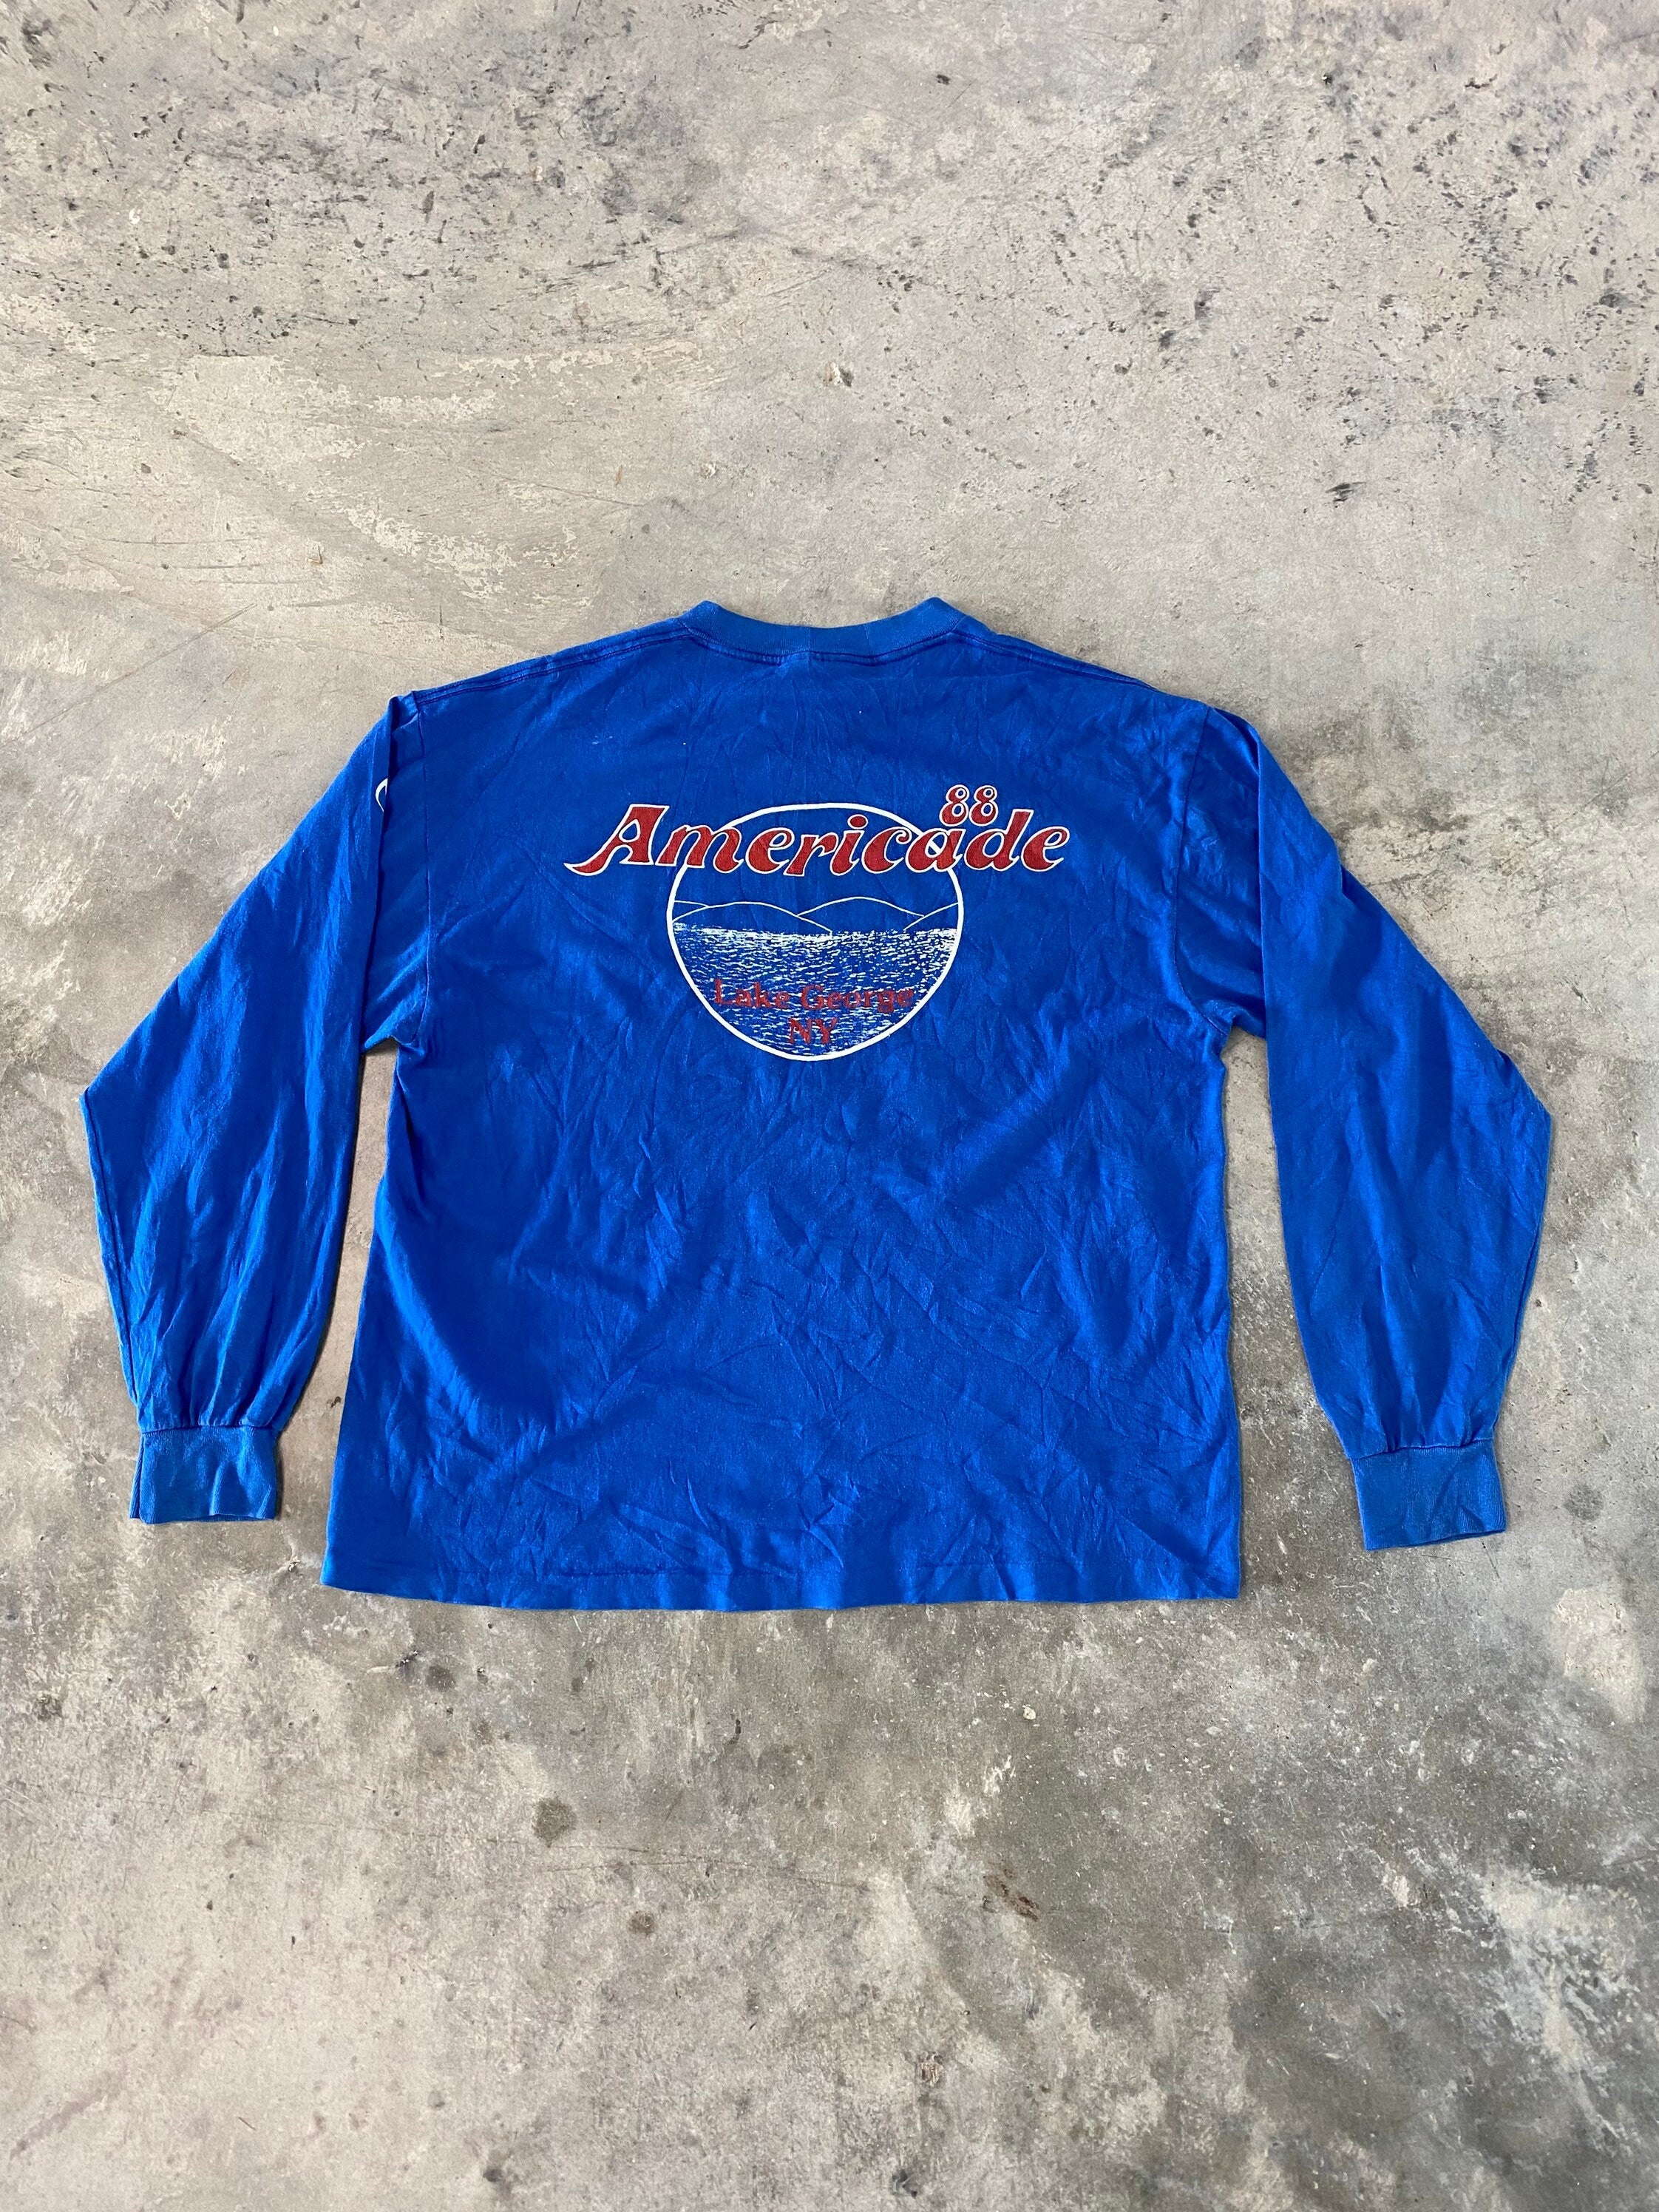 Vintage 1988 Americade Motorcycle Long Sleeve T-Shirt Size Small